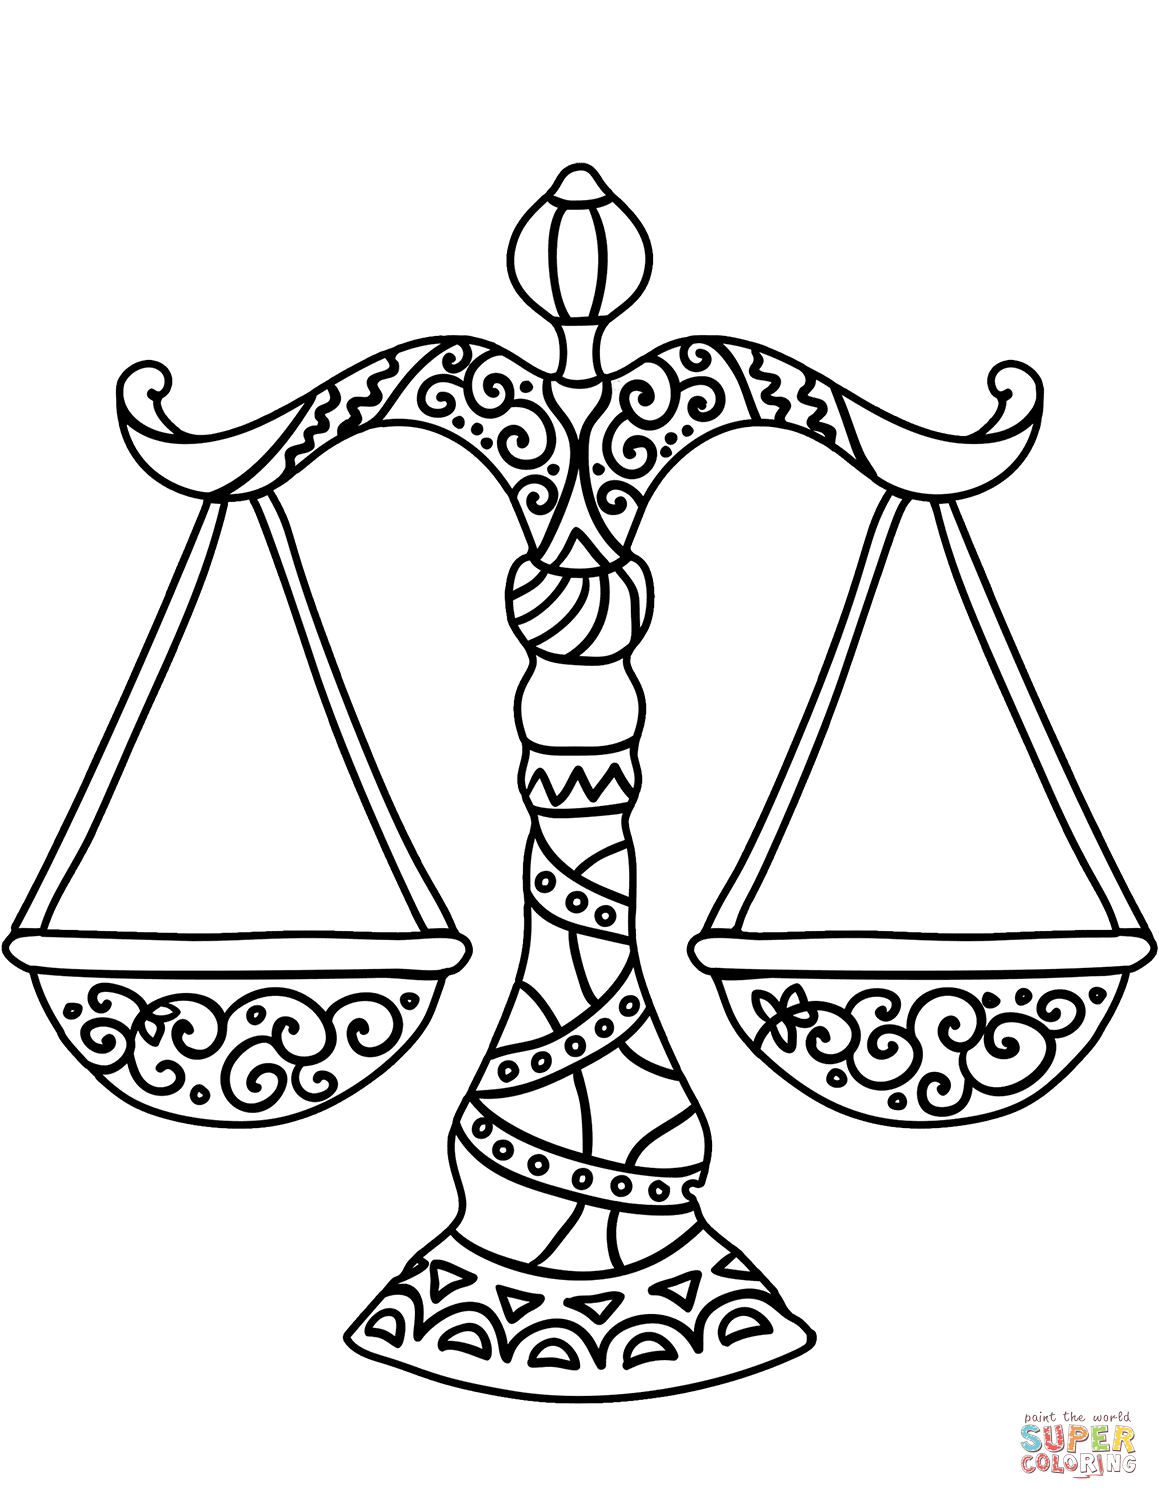 Libra zodiac sign coloring page | Free Printable Coloring Pages